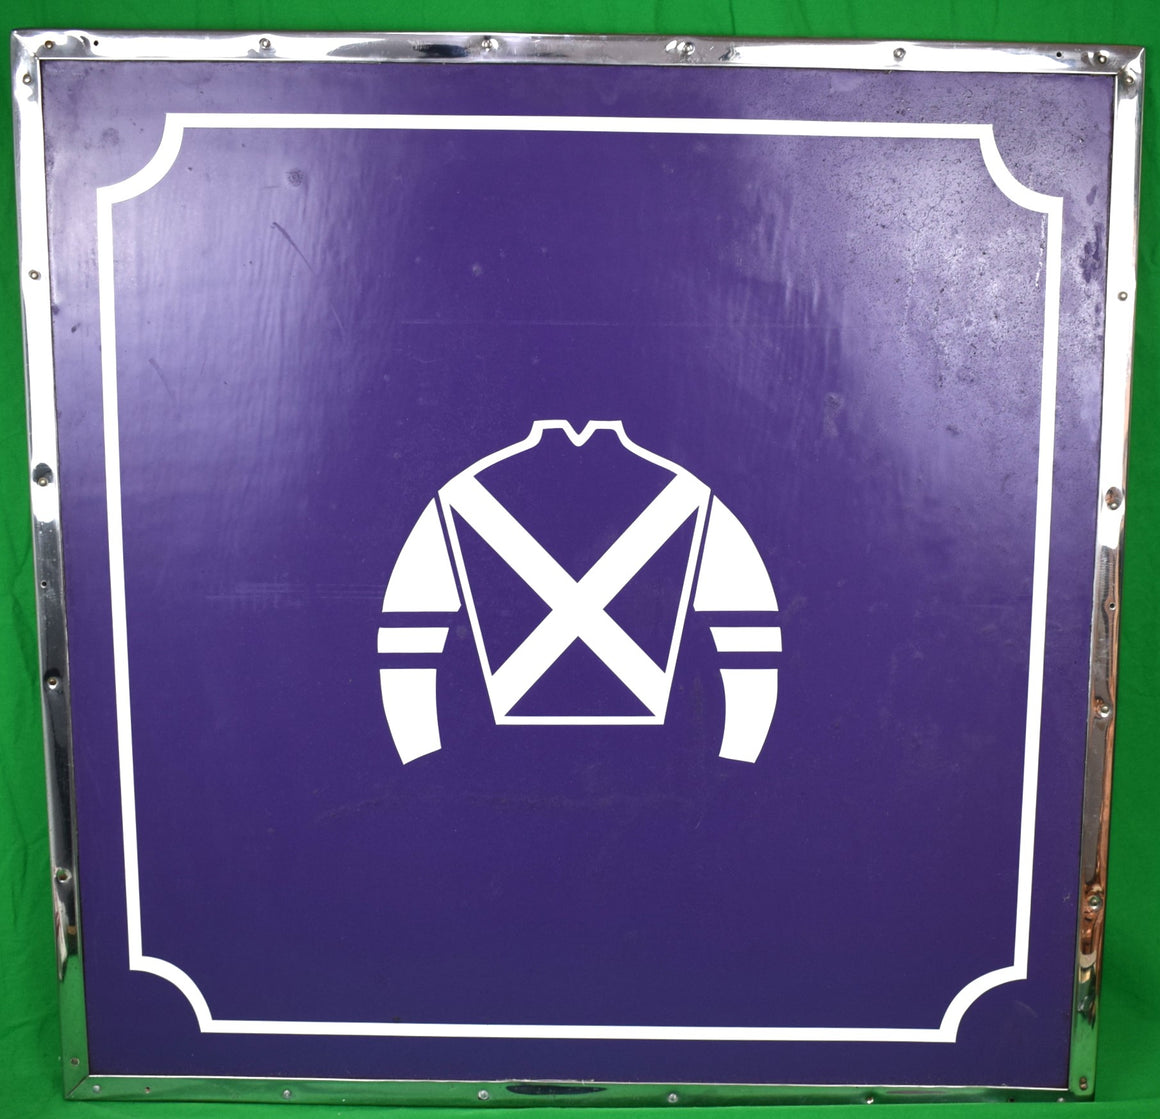 "Racing Stable Owner's Purple/ White Jockey Sign"